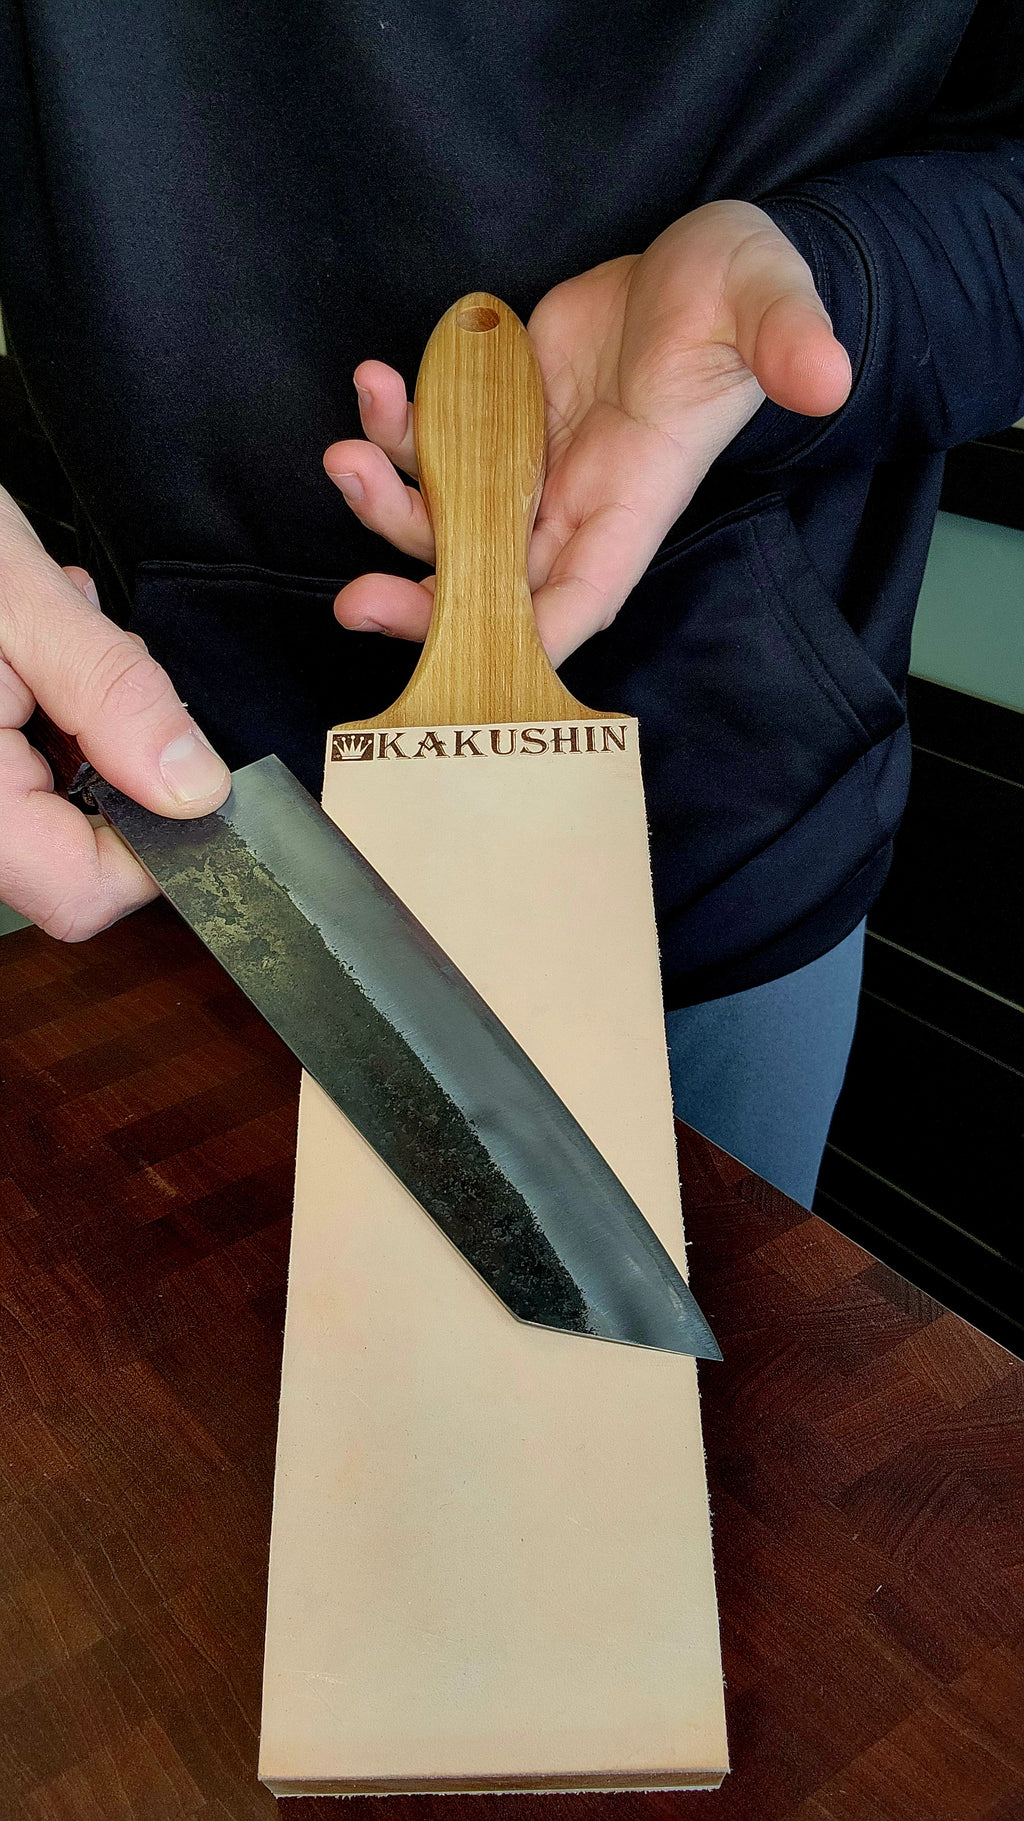 Using a double face leather strop on kitchen knives